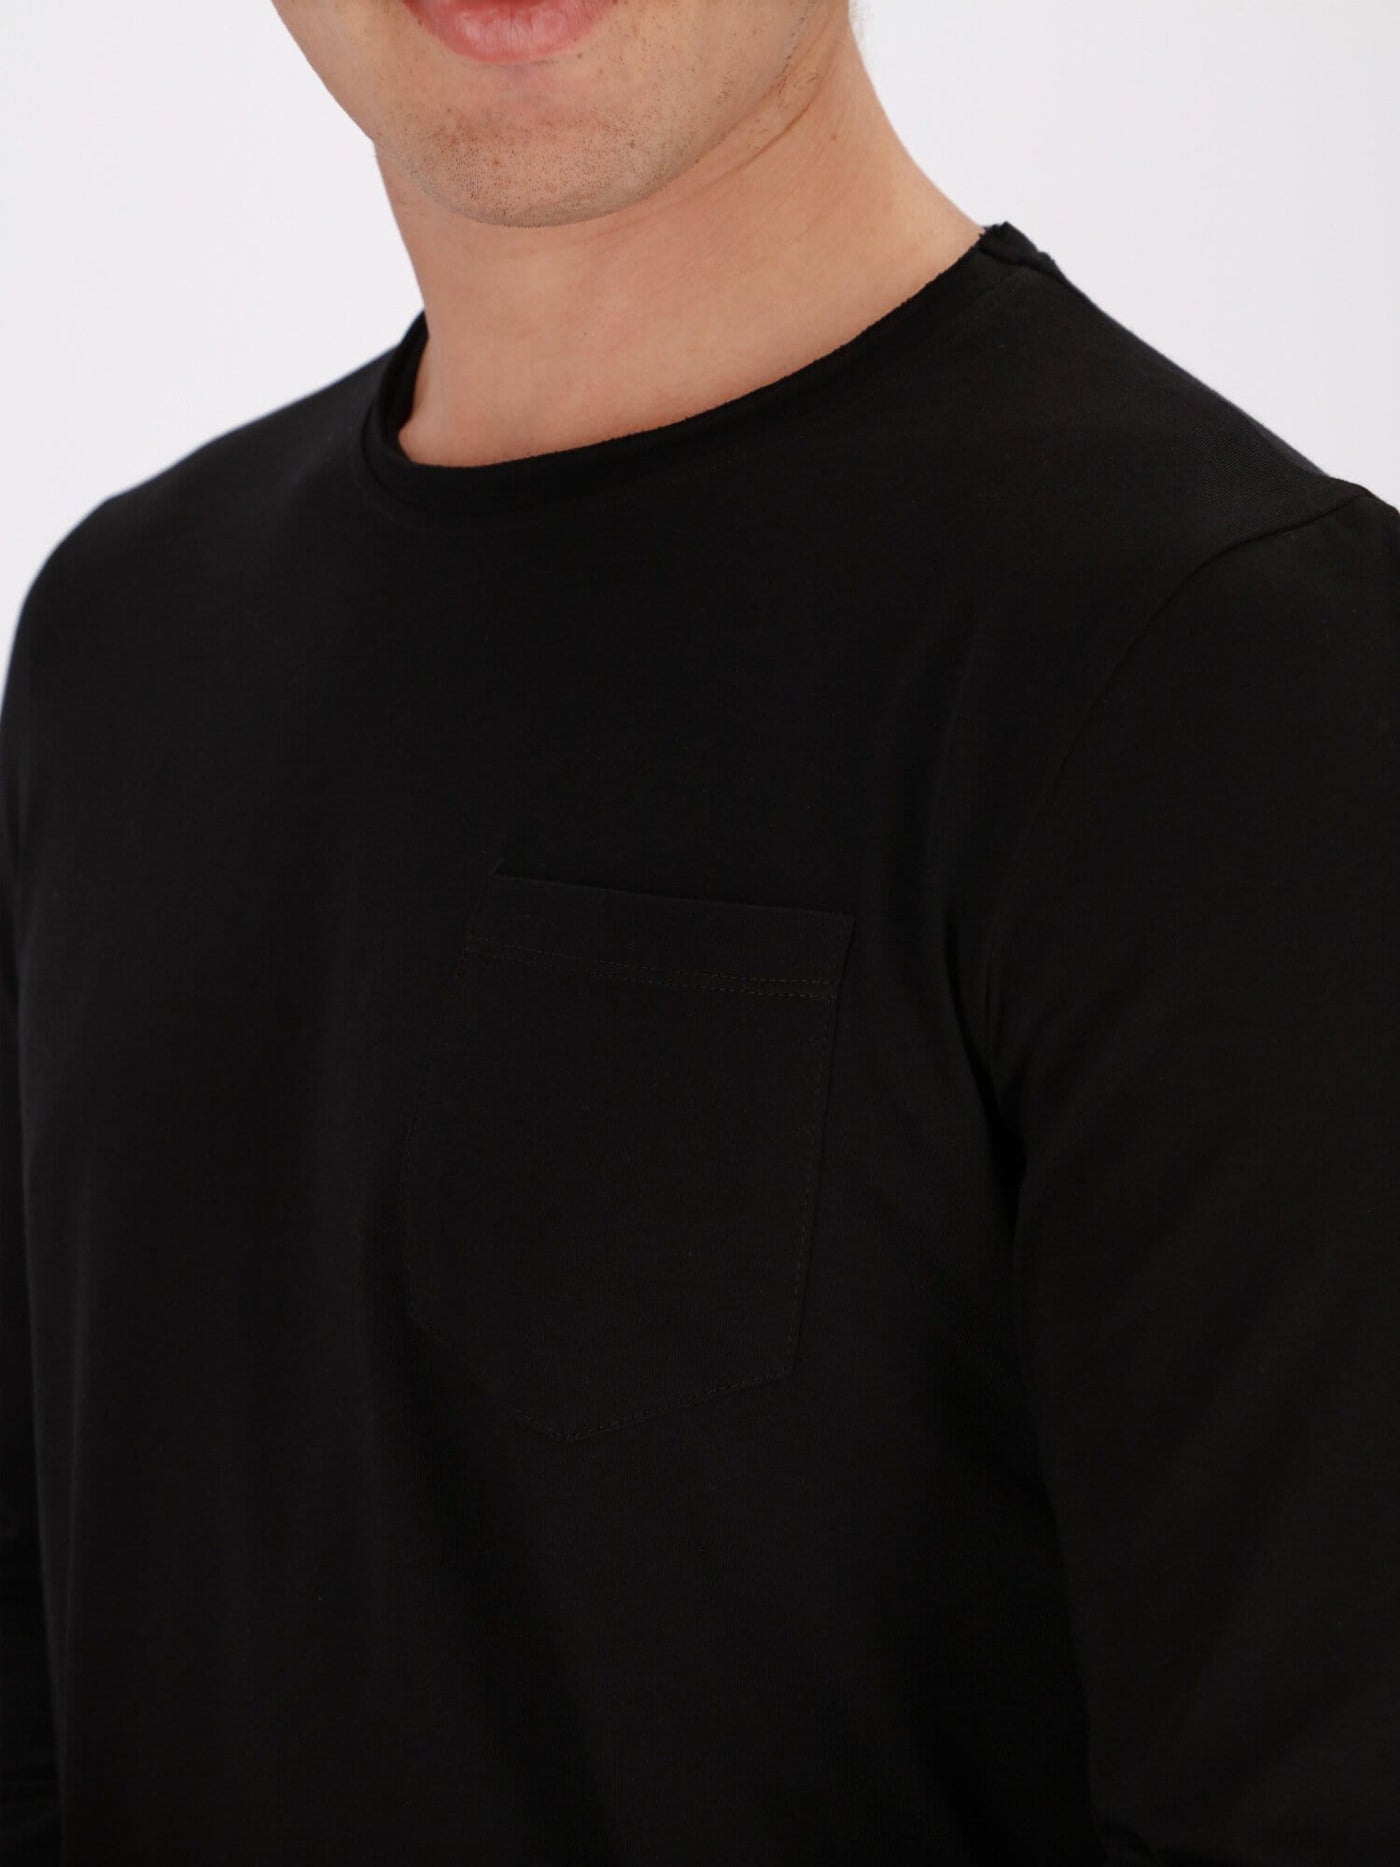 OR T-Shirts Chest Pocket Round Neck T-Shirt